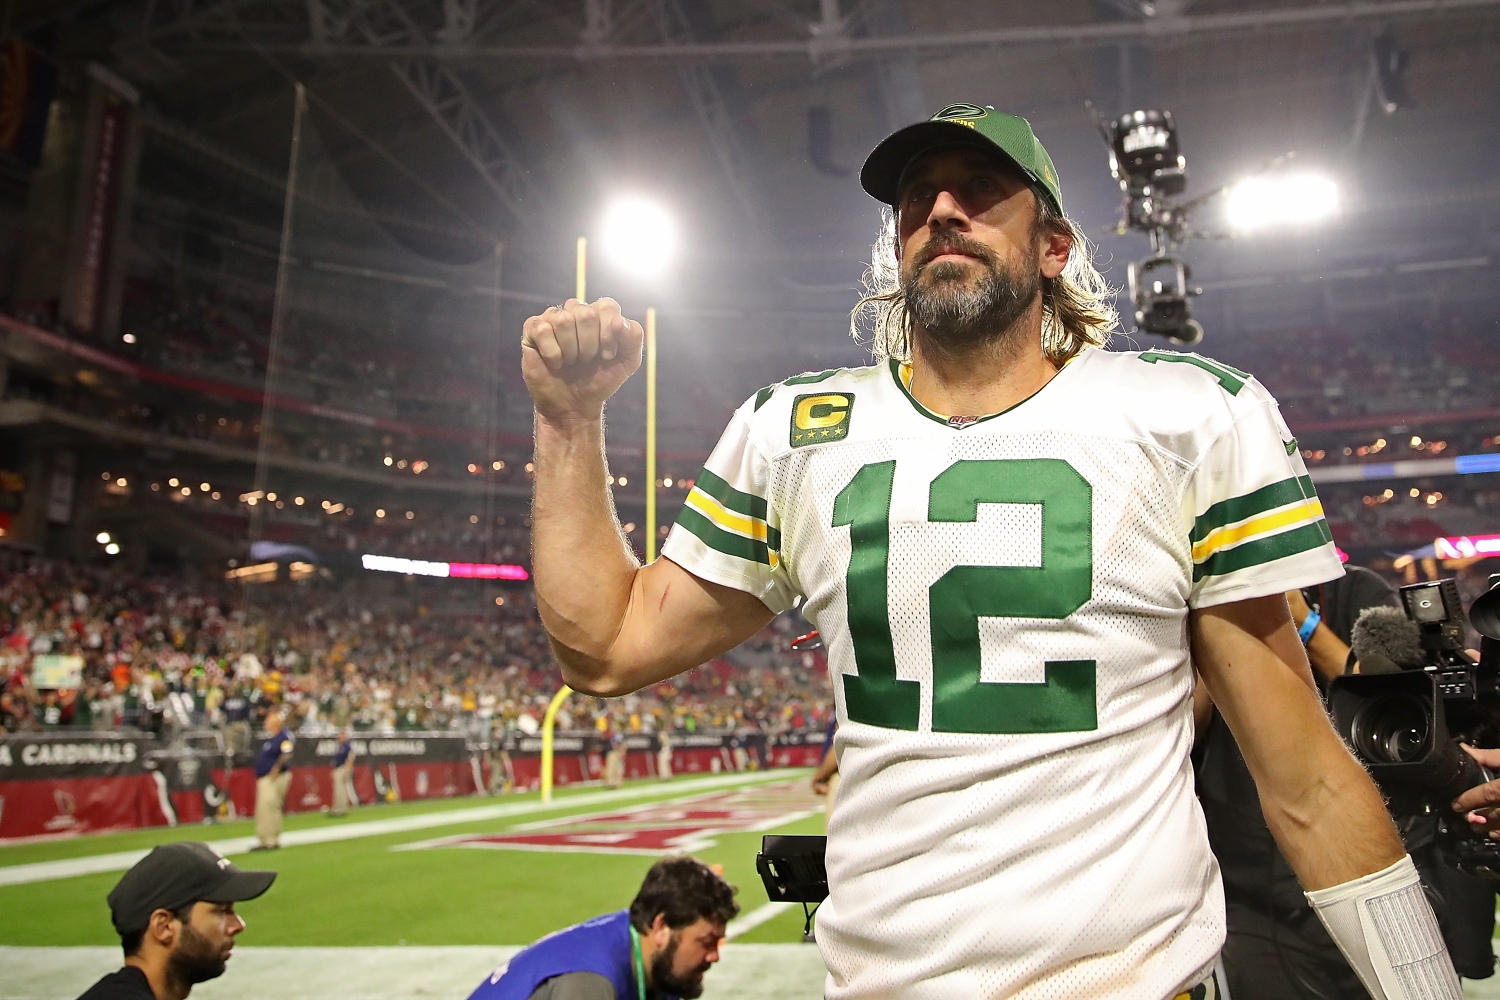 Green Bay Packers quarterback Aaron Rodgers exits the field after a win over the Arizona Cardinals.